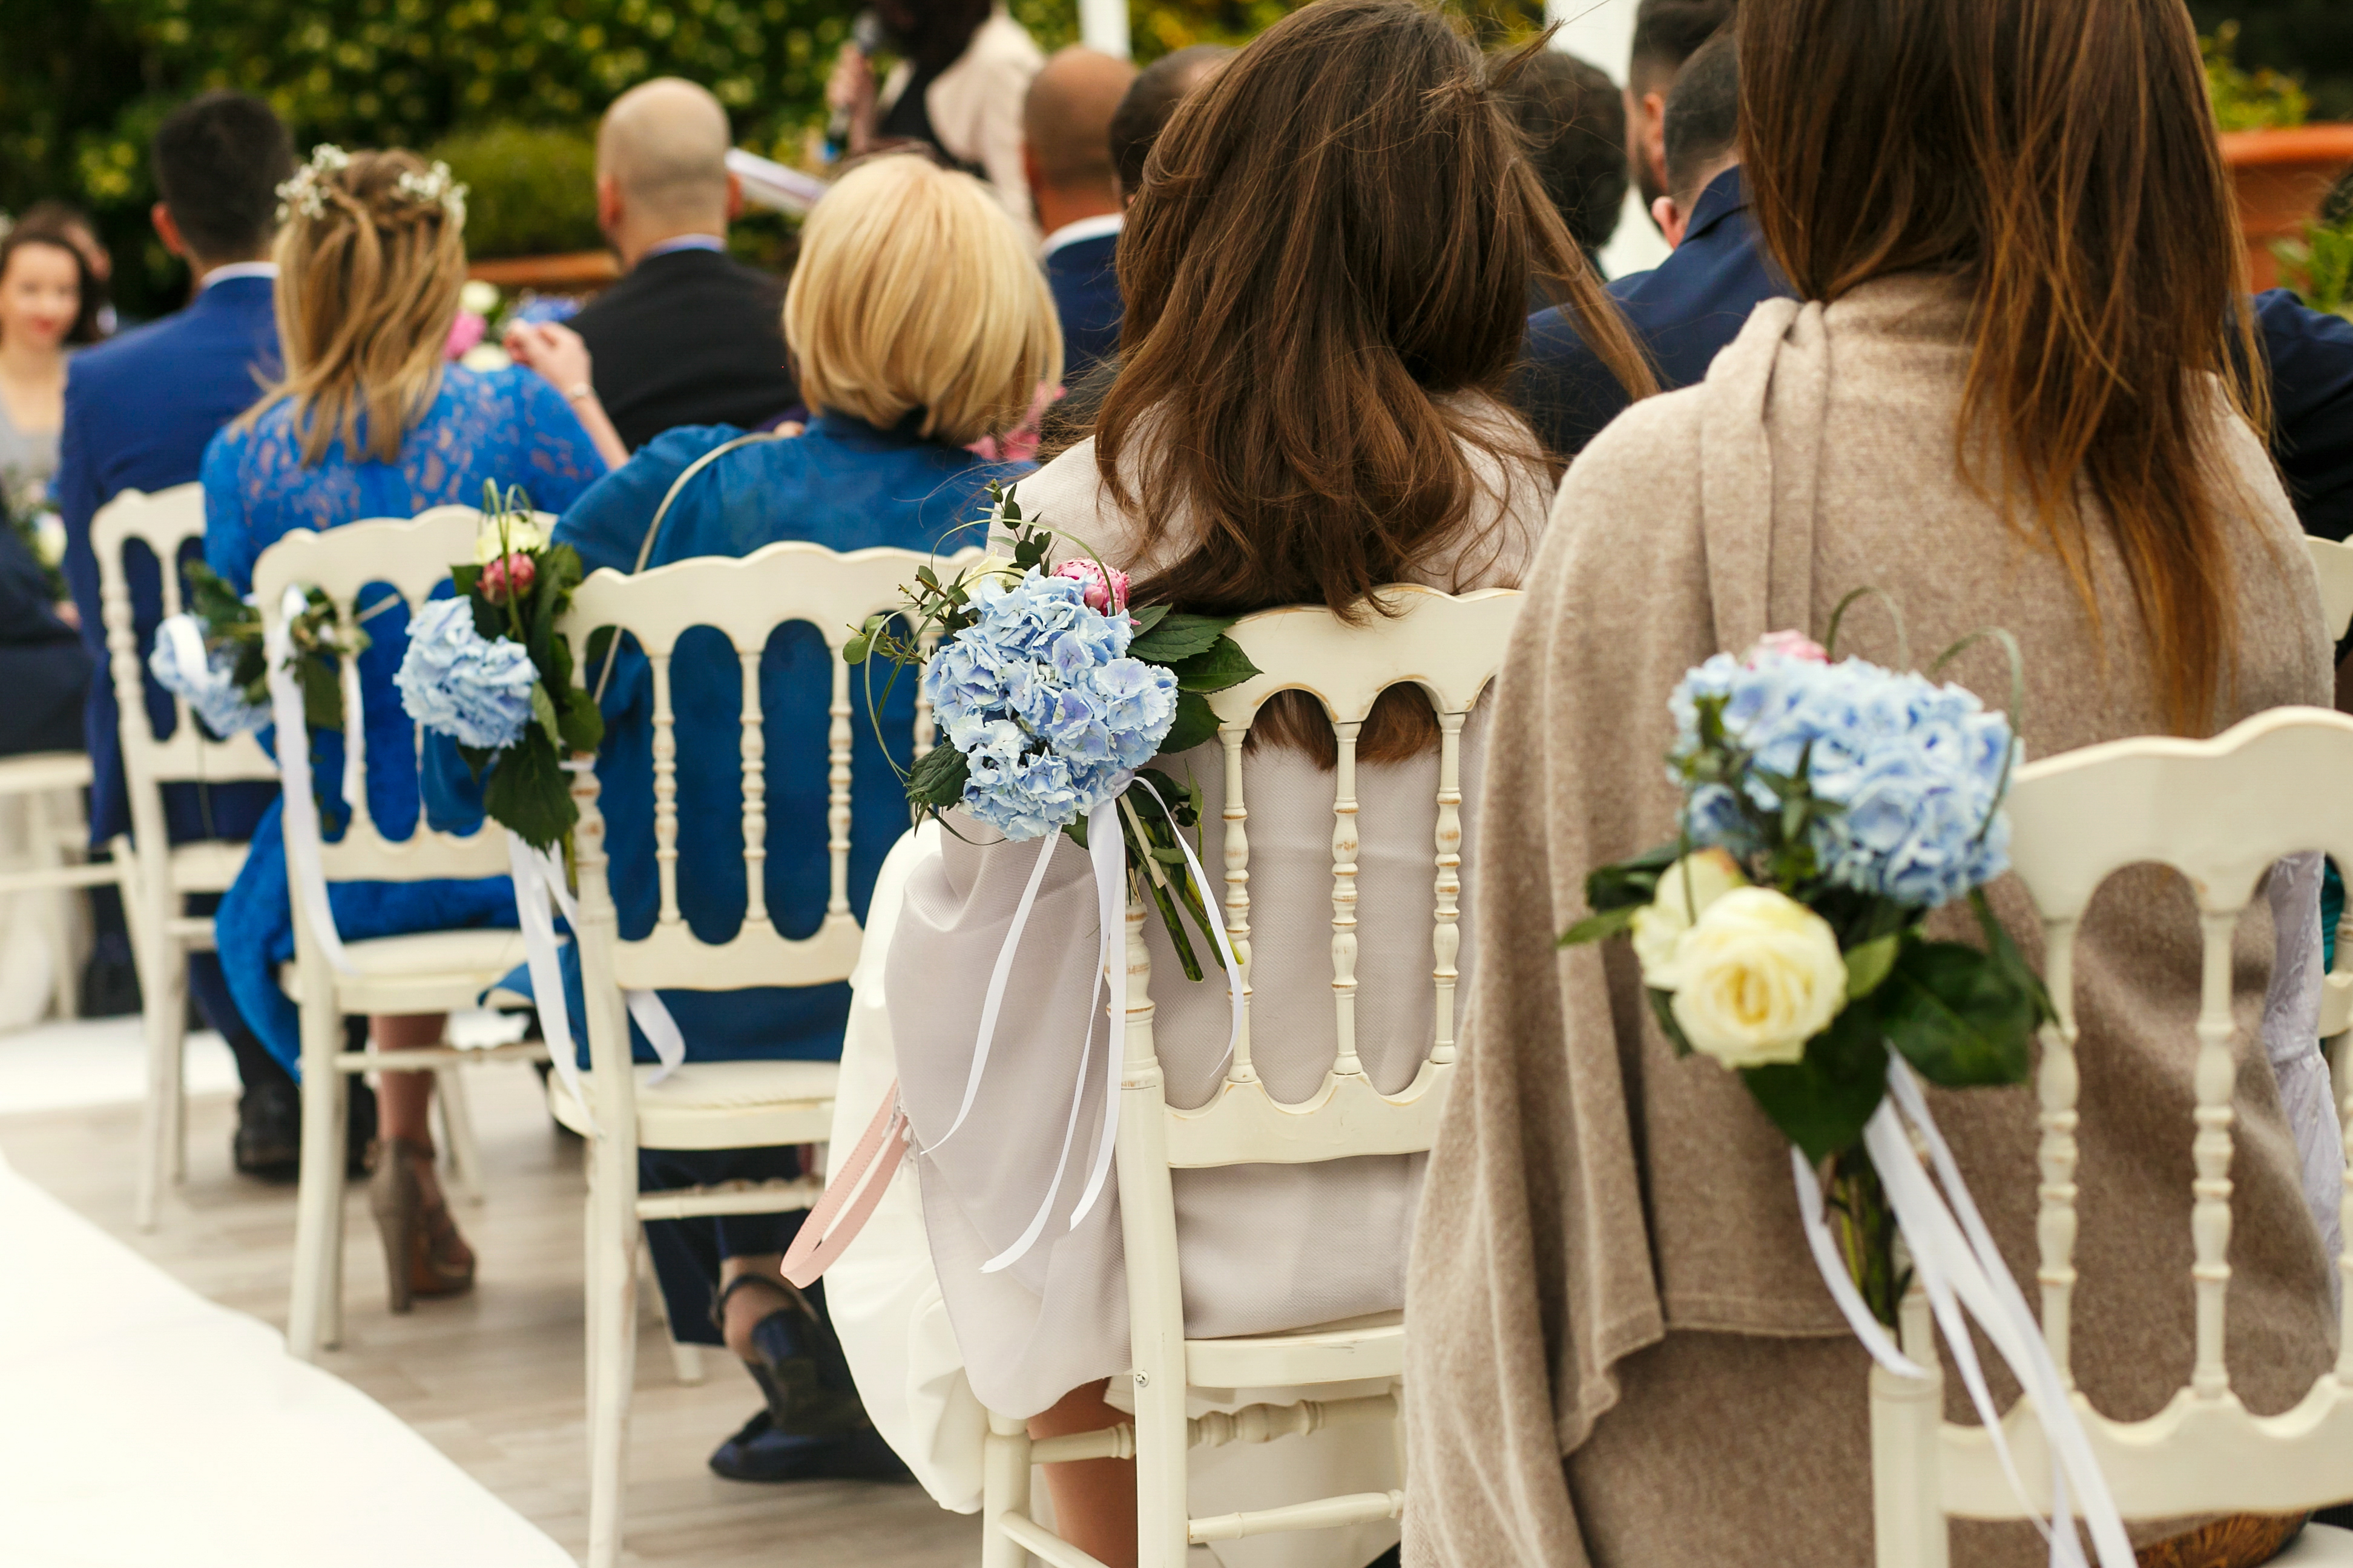 Guests seated during a wedding ceremony | Source: Shutterstock